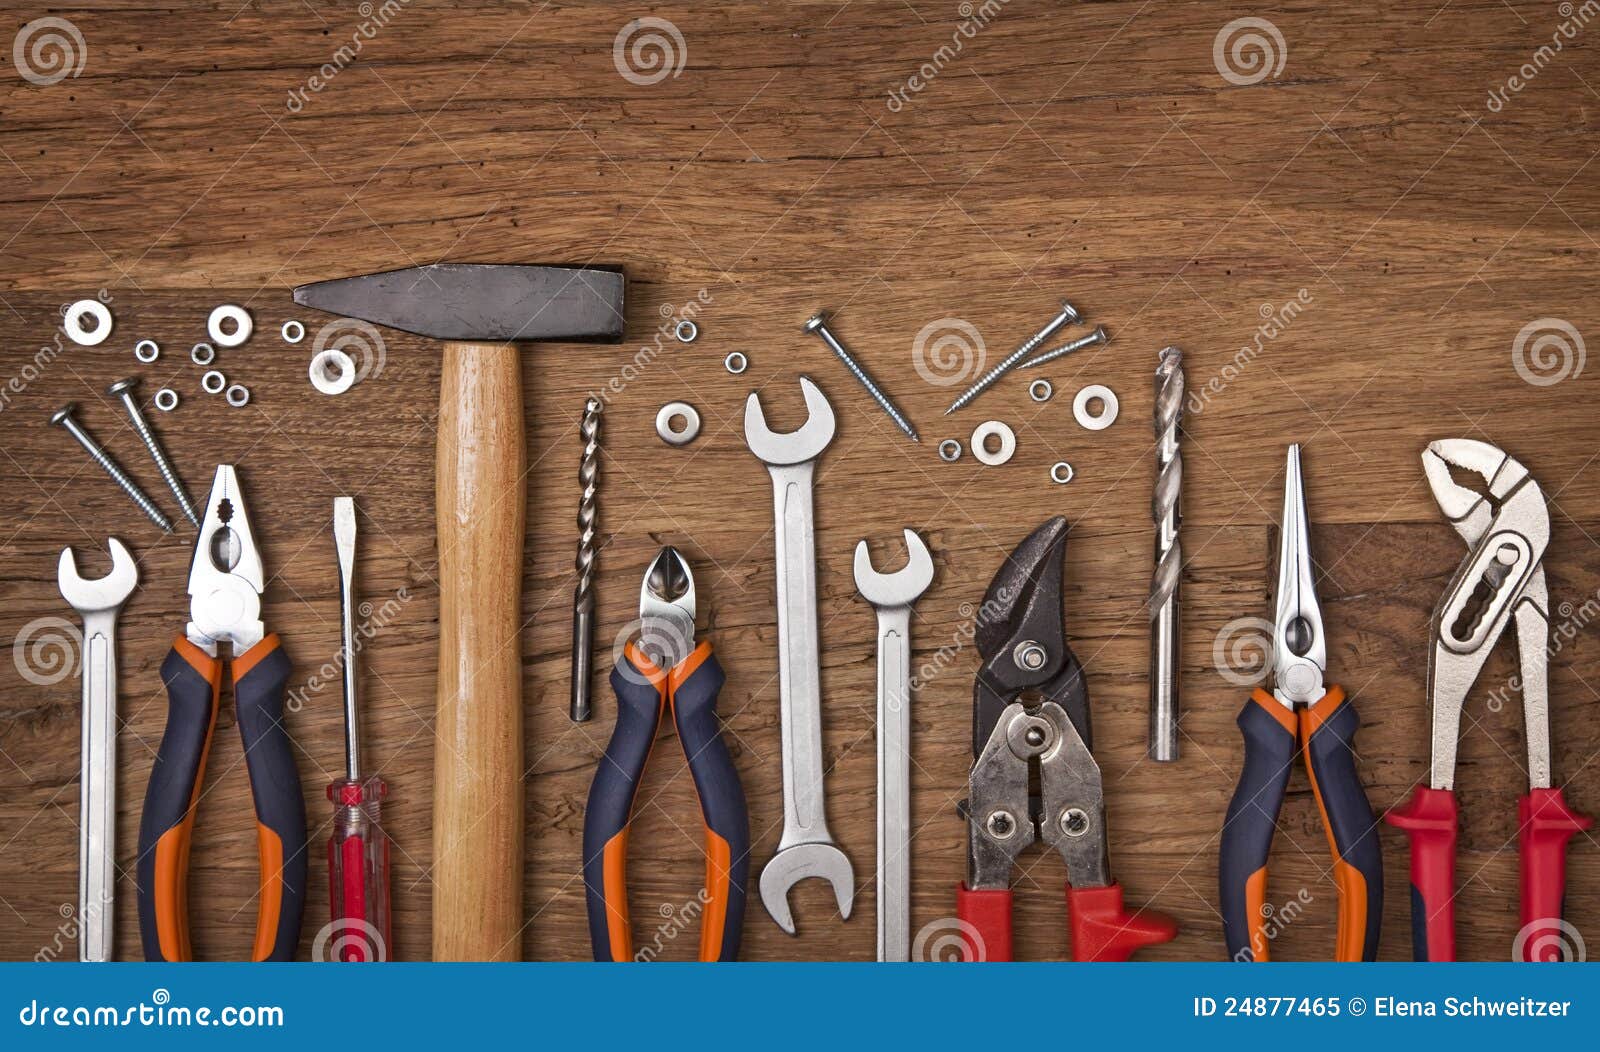 Set of different tools stock image. Image of tools ...